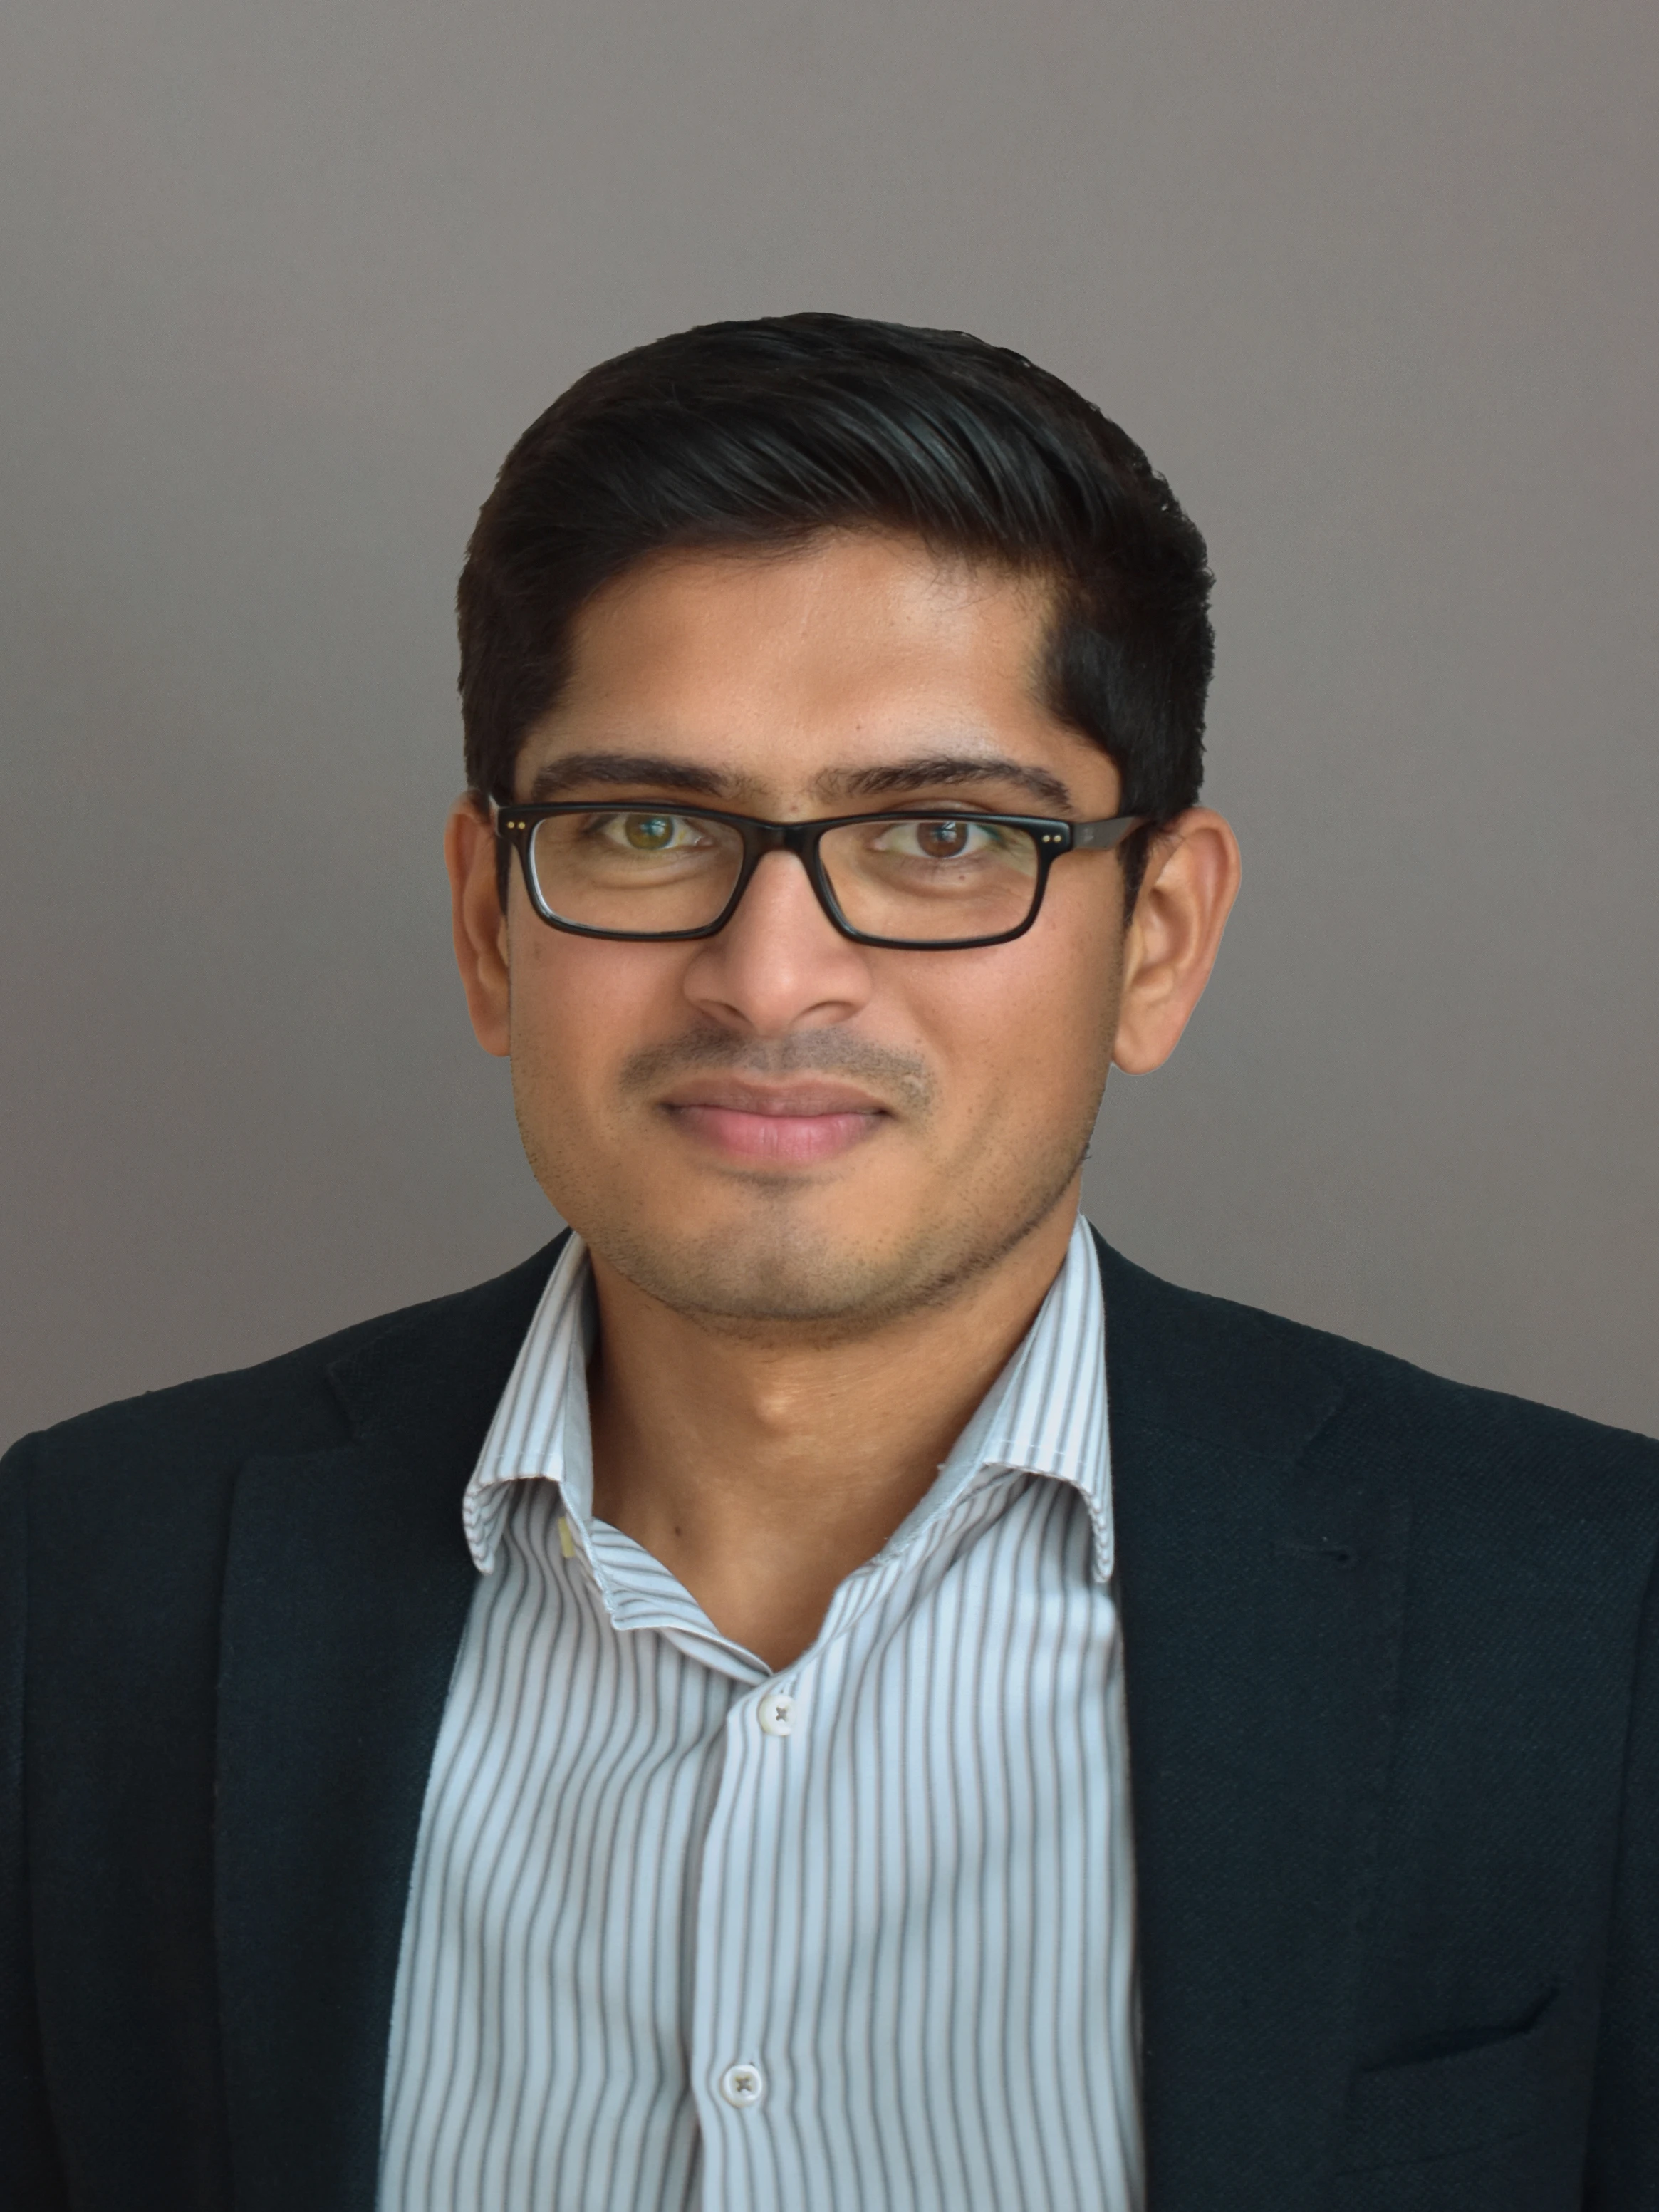 A photo of Rohan Desai Head of Finance at MMT